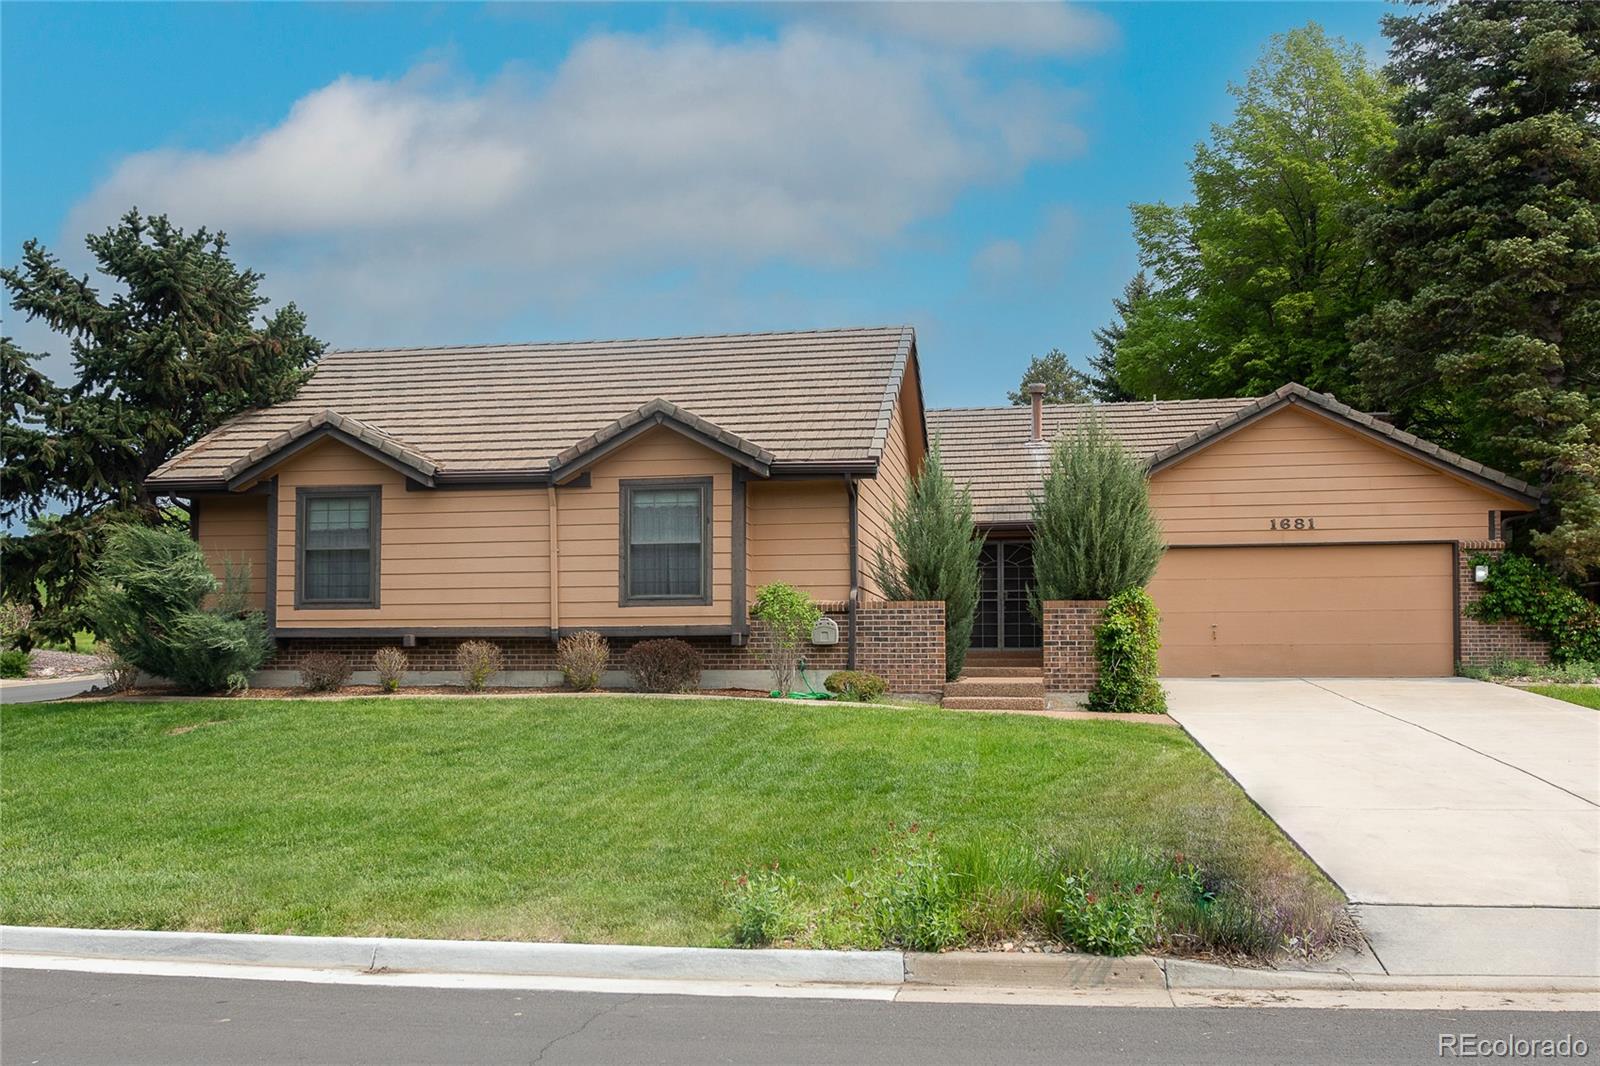 1681 W 116th Court, Westminster, CO 80234 - MLS#: 8707261